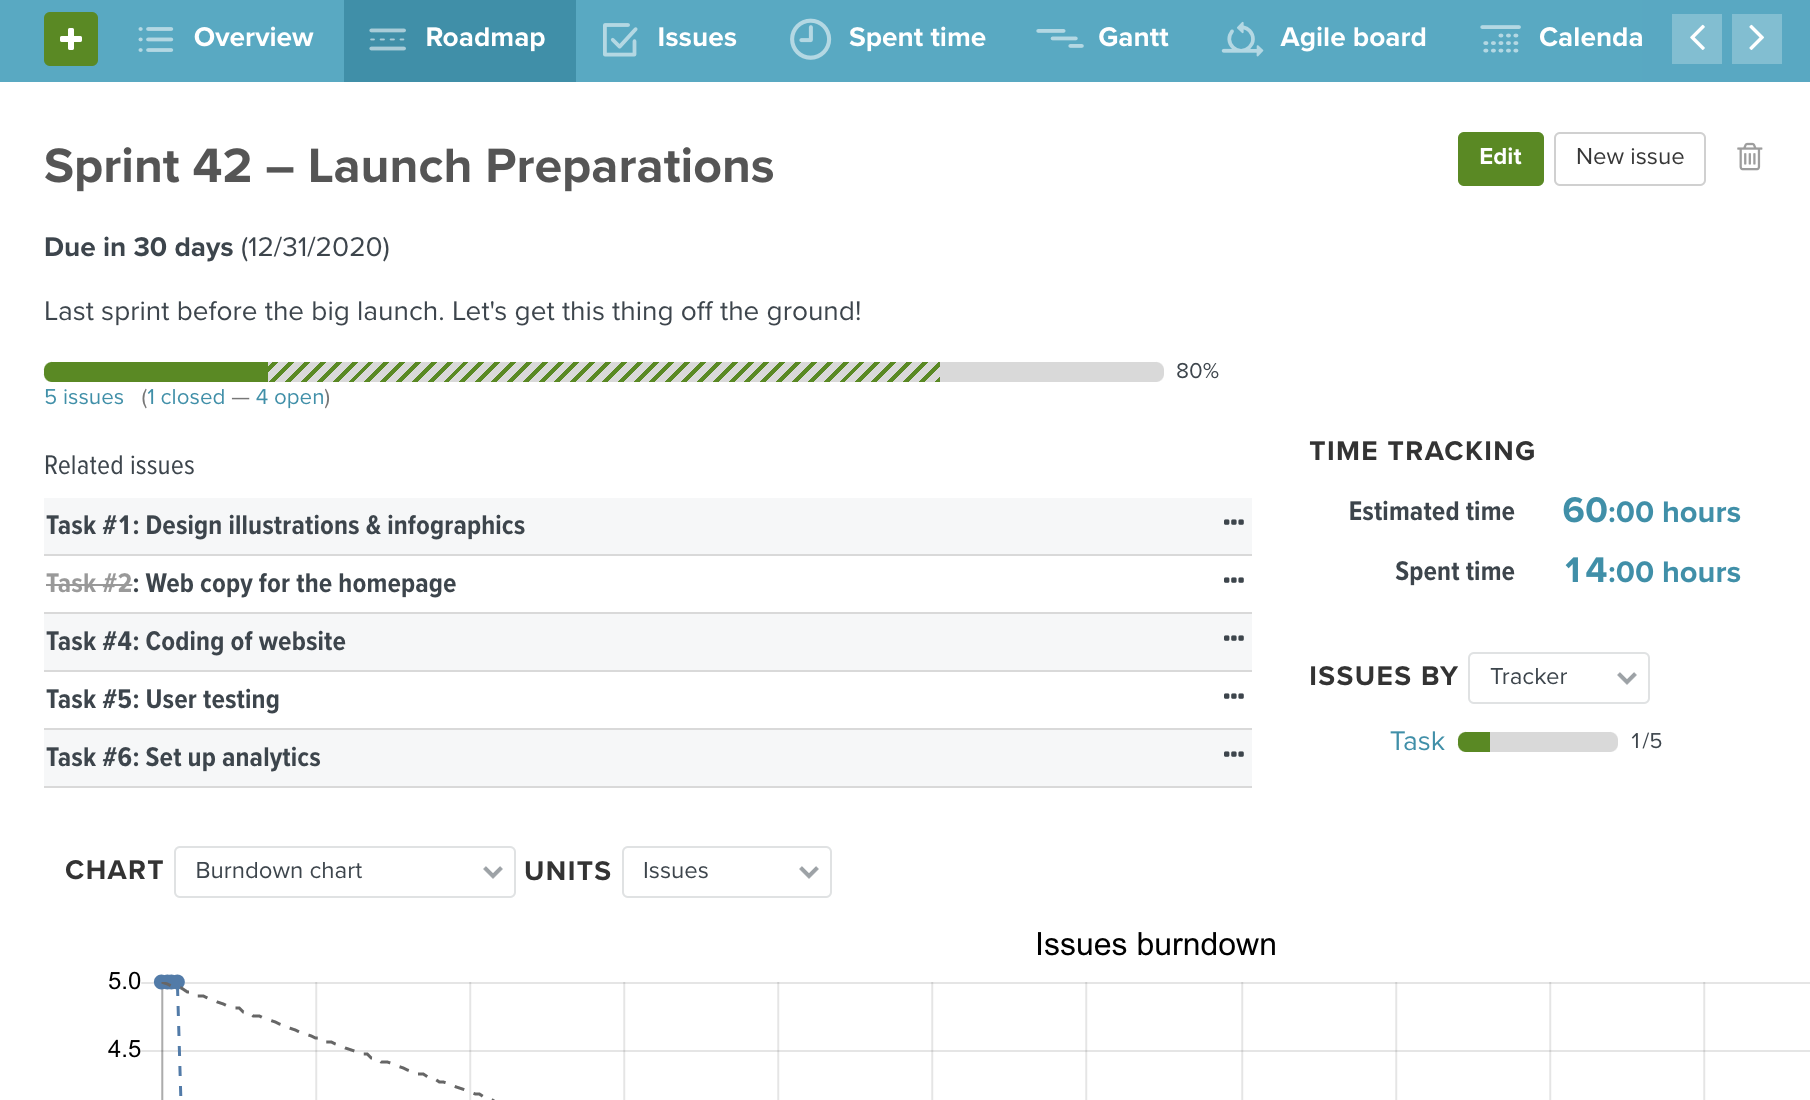 Sprints shown in the Roadmap view